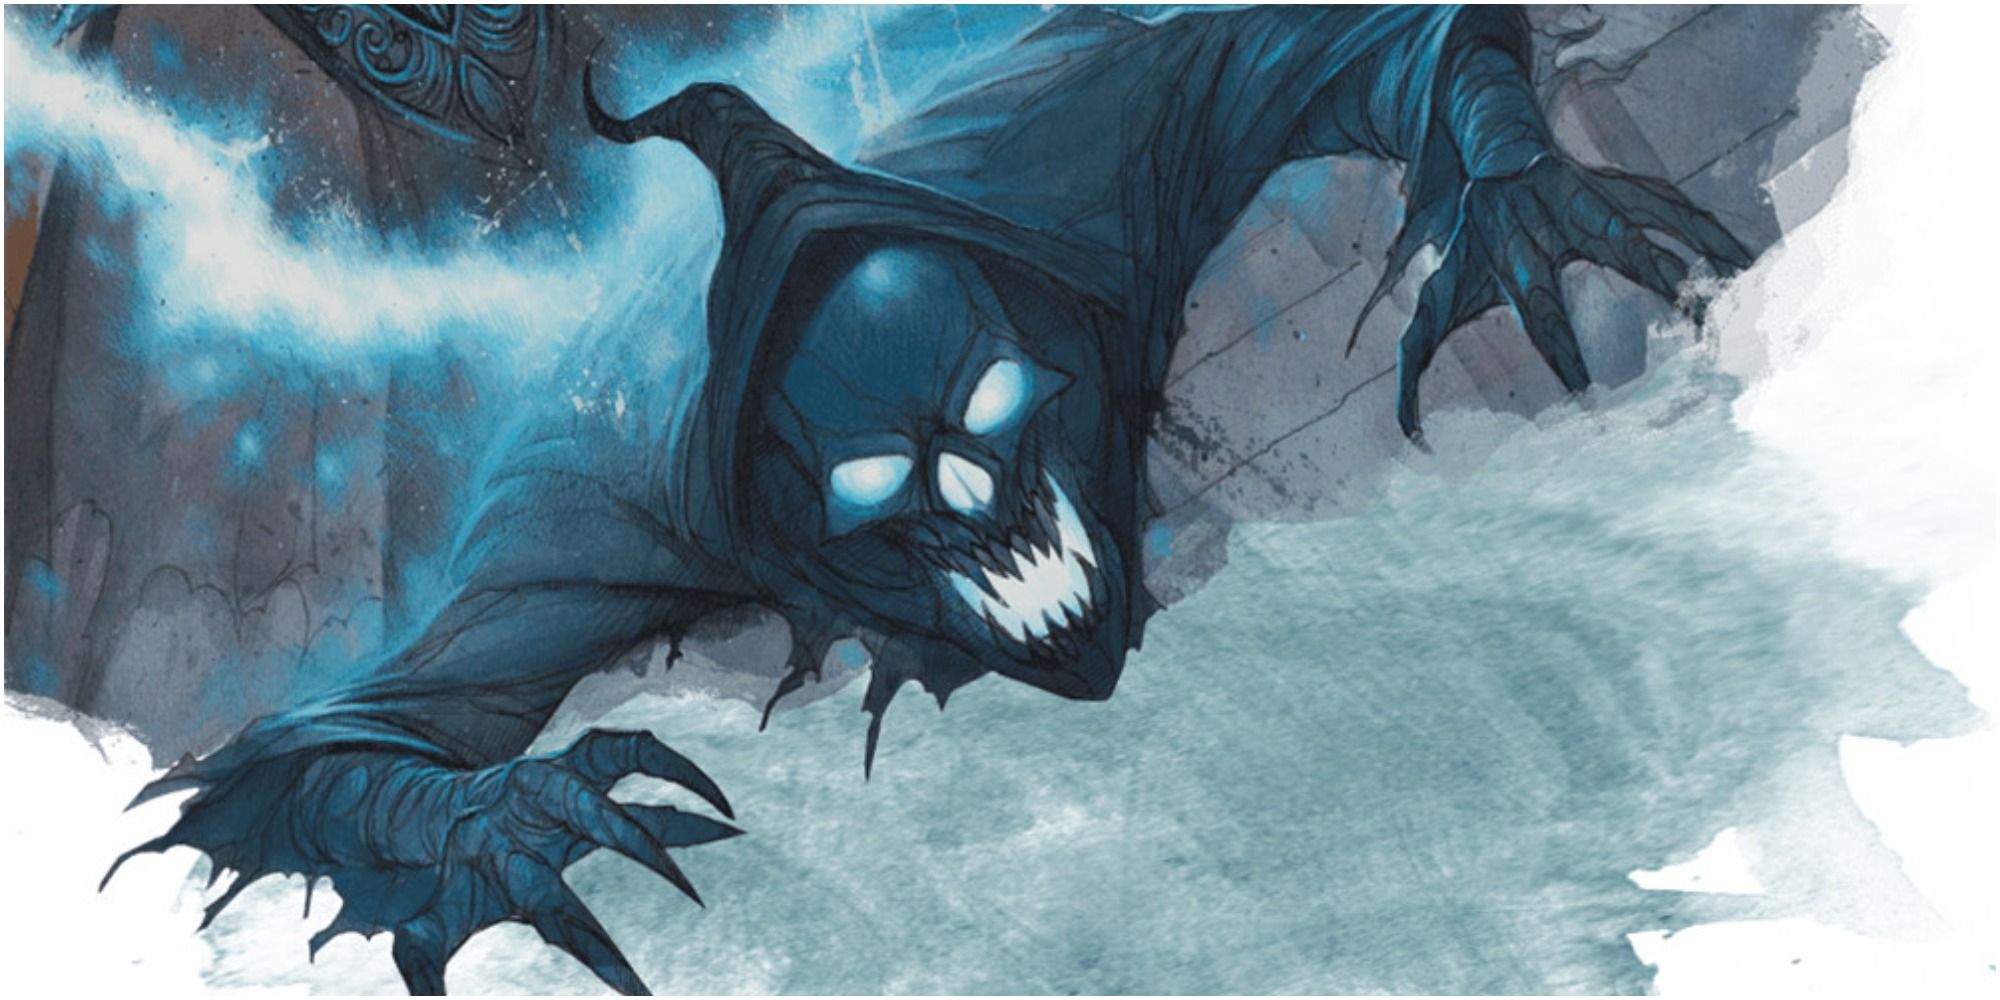 Art of a Deathlock Wight from Dungeons & Dragons